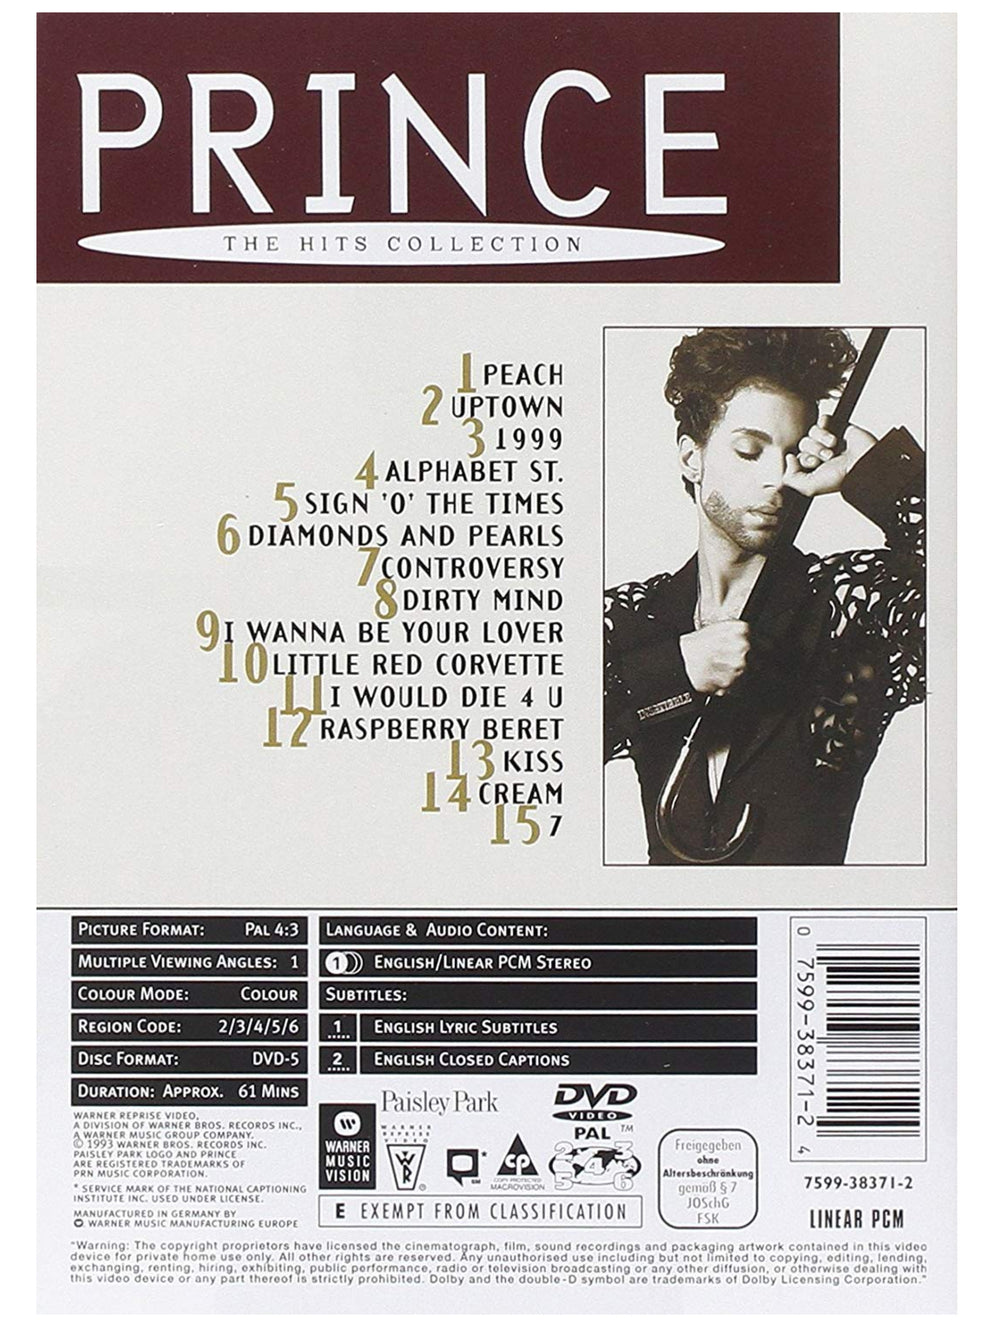 Prince –  The Hits Collection DVD PAL Format